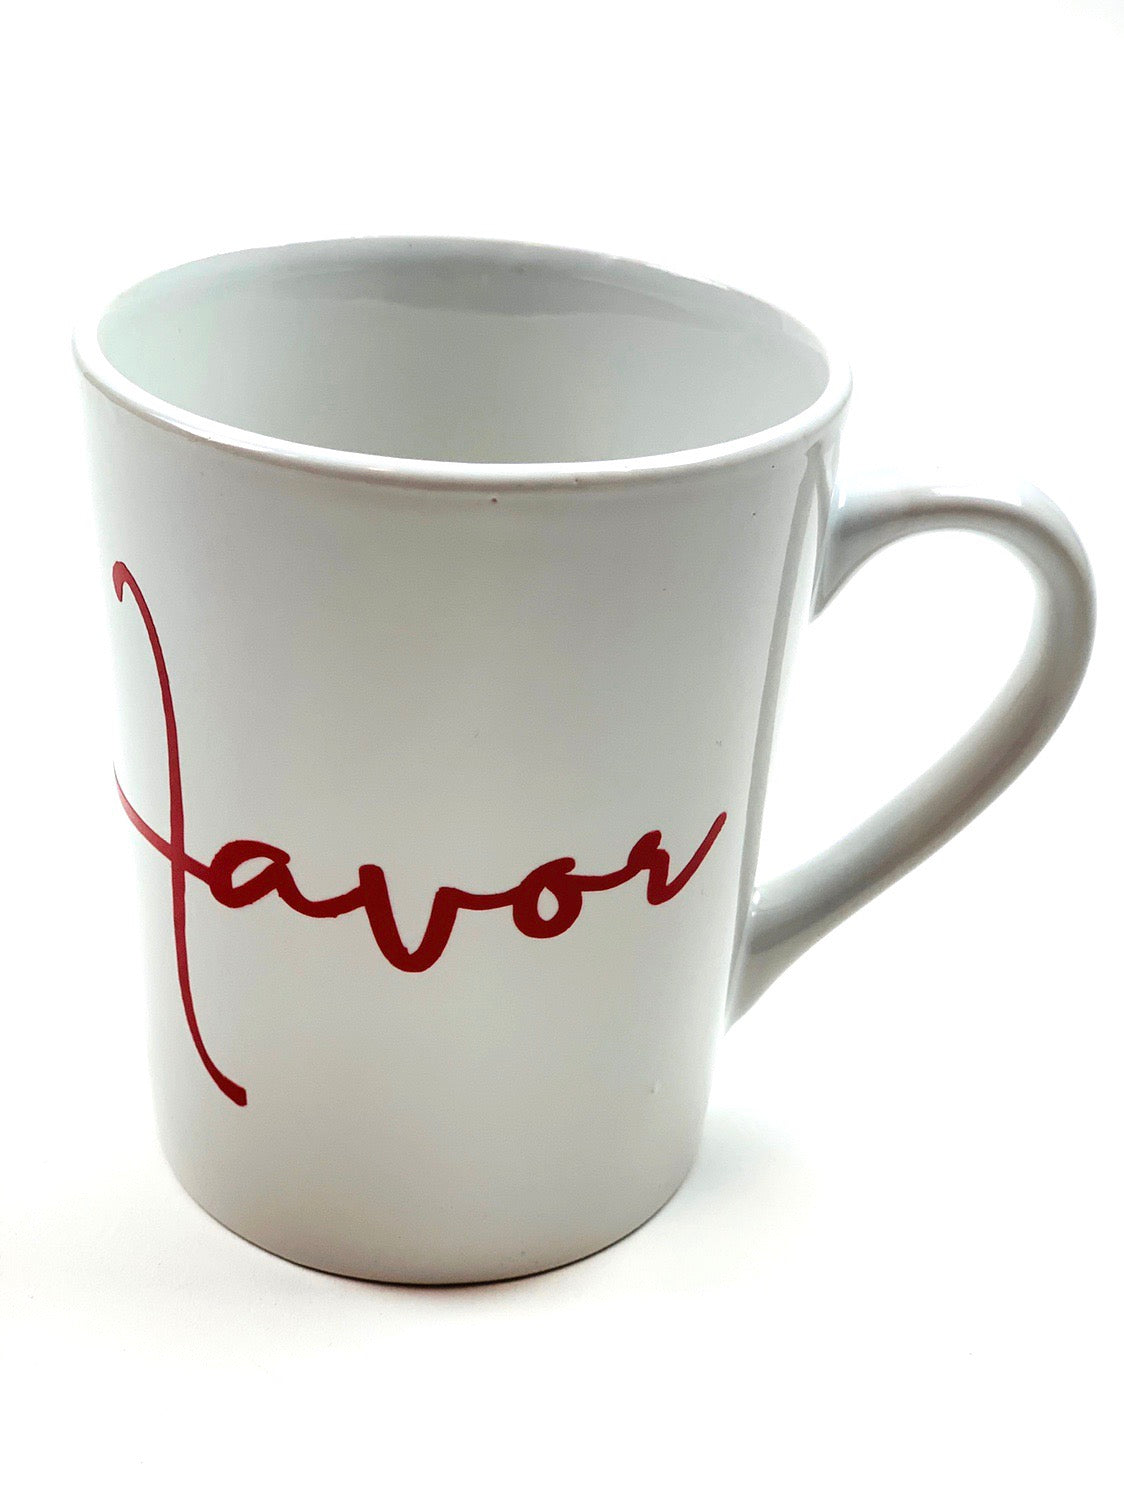 Red Favor Mug - Horizontal - Jewellery Unique Gifts & Accessories